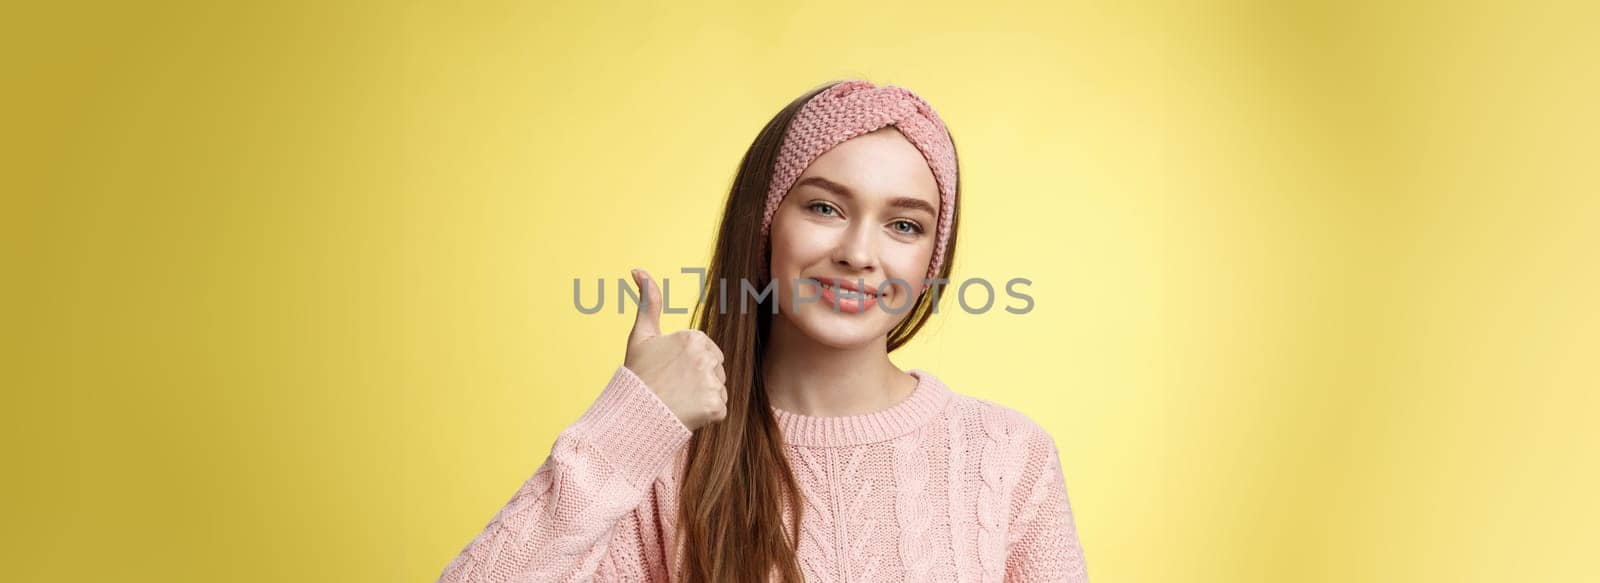 Pretty european young girl in headband, pink sweater smiling delighted, pleased showing thumbs up in agreement, approval, giving good recommendation, liking interesting great idea smiling cheerful.